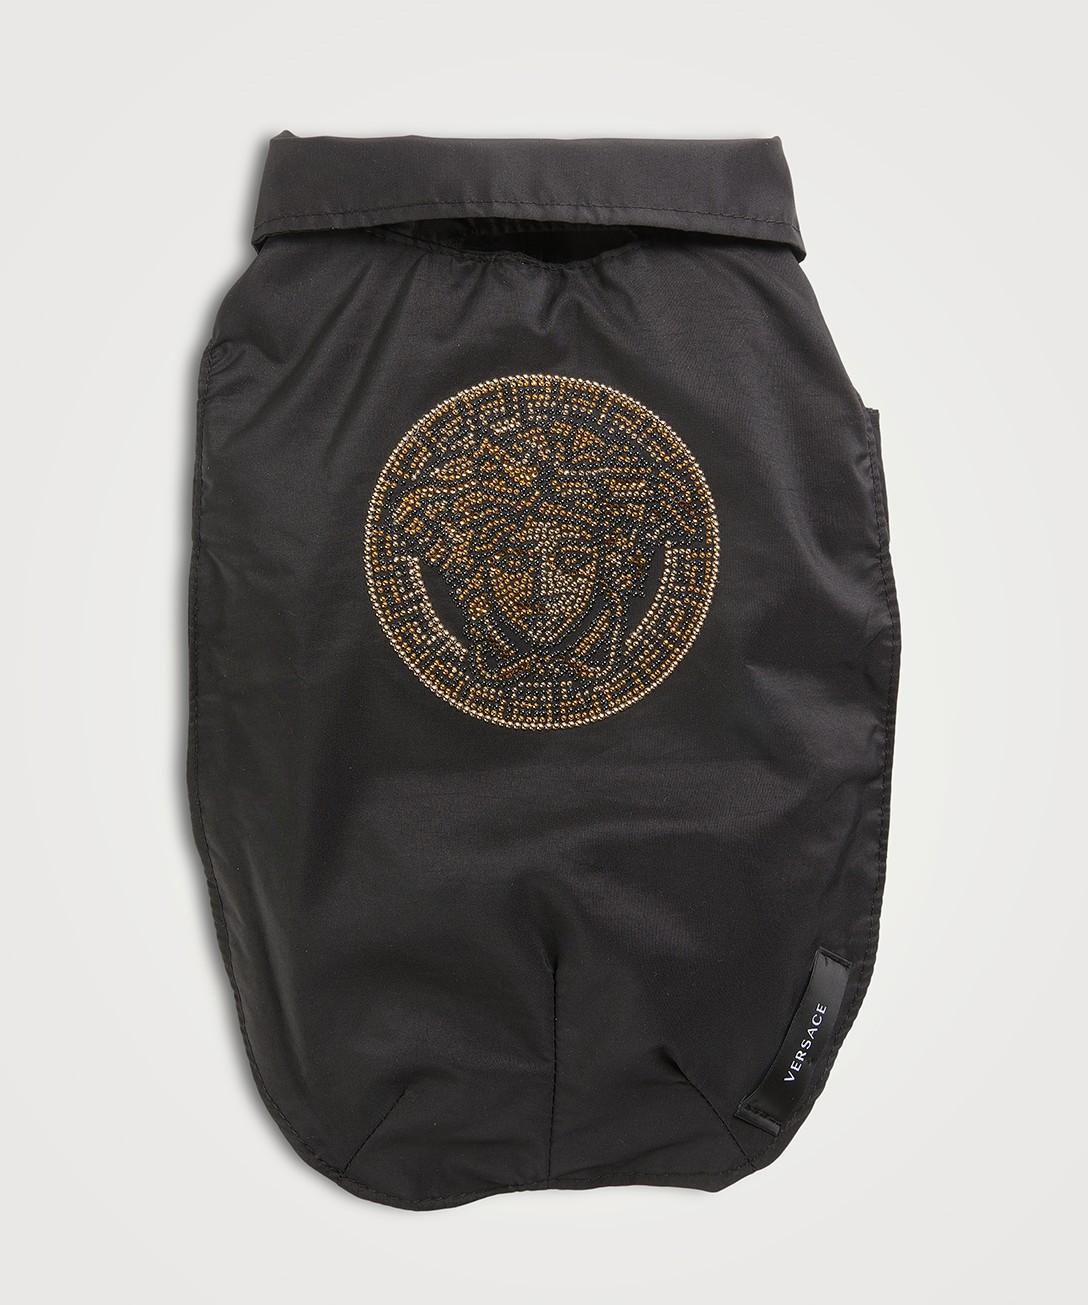 A black Versace dog coat with the Versace logo in gold on the back.